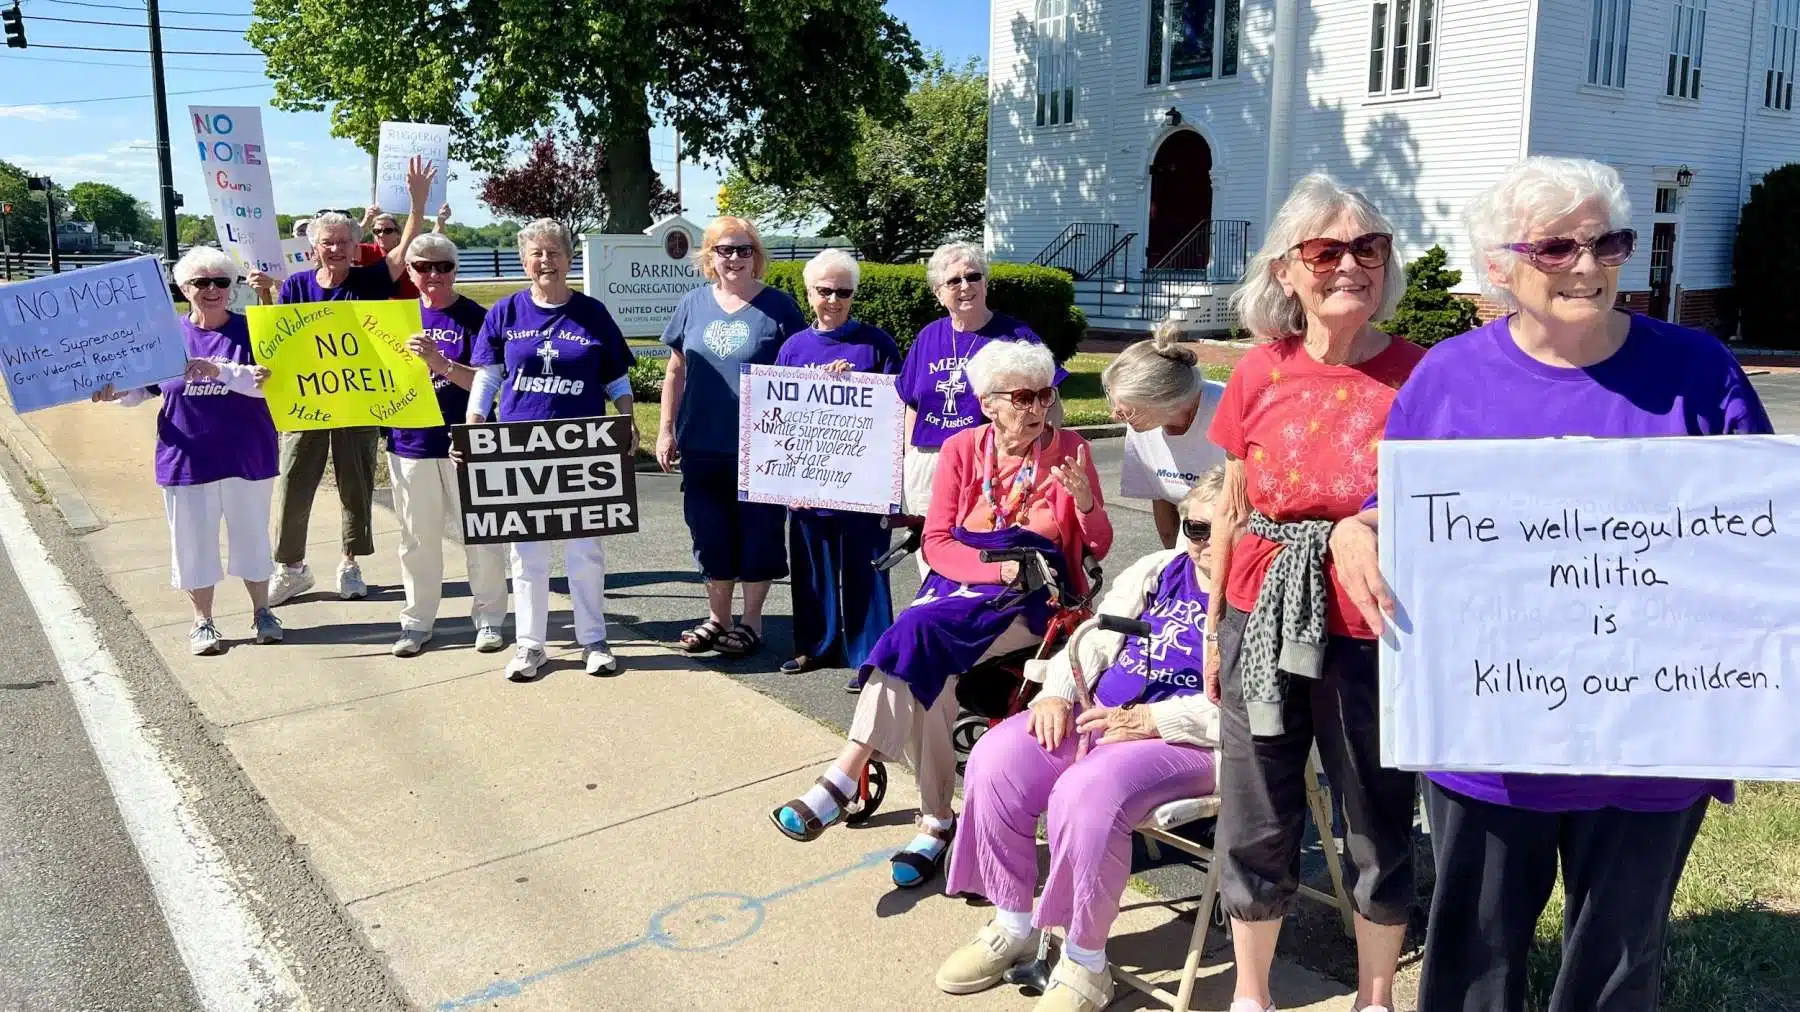 Rhode Island News: A protest in Barrington shouts: No more!